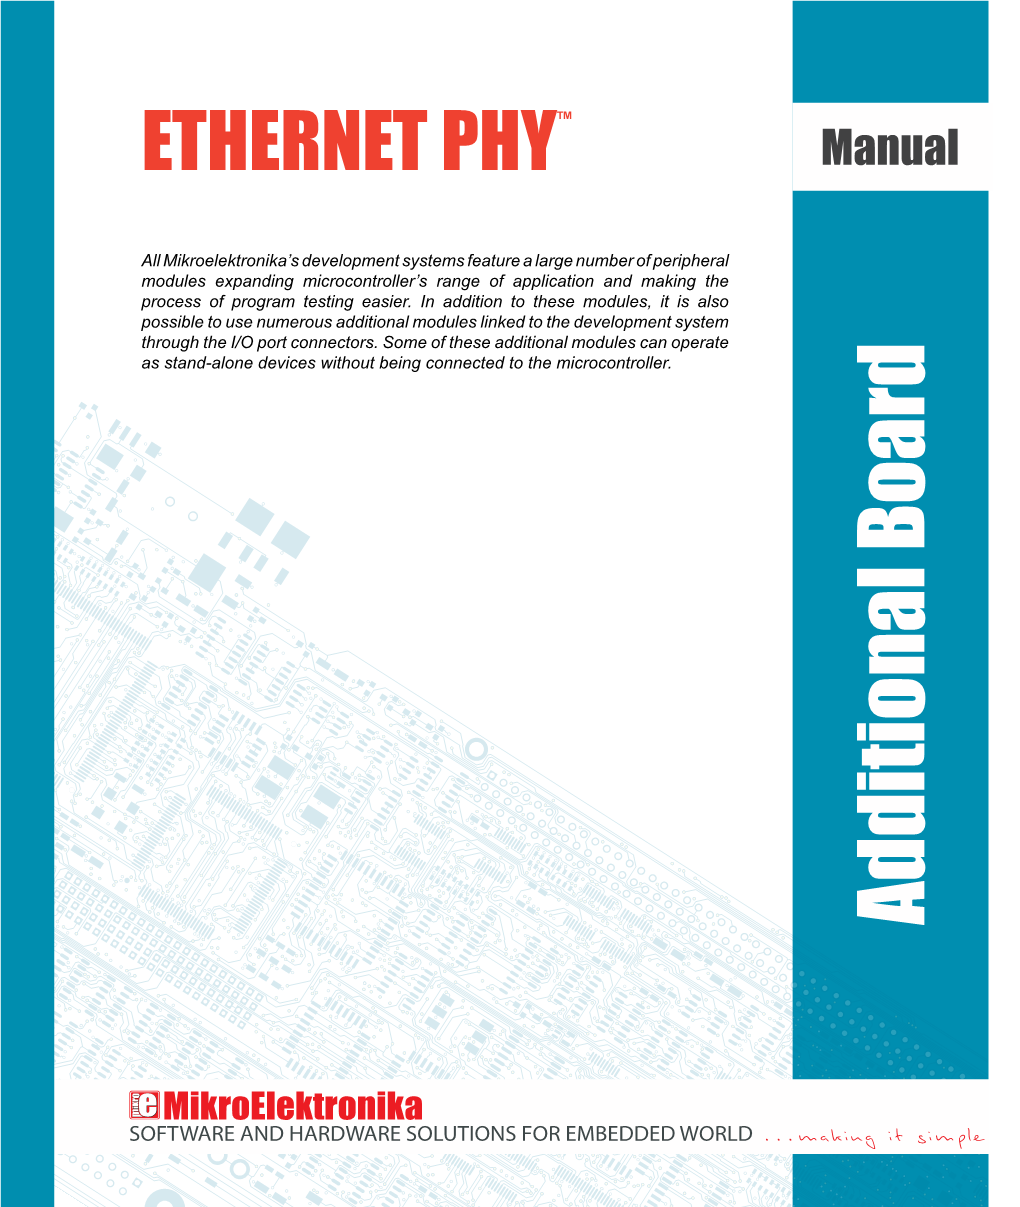 ETHERNET PHY Board User Manual